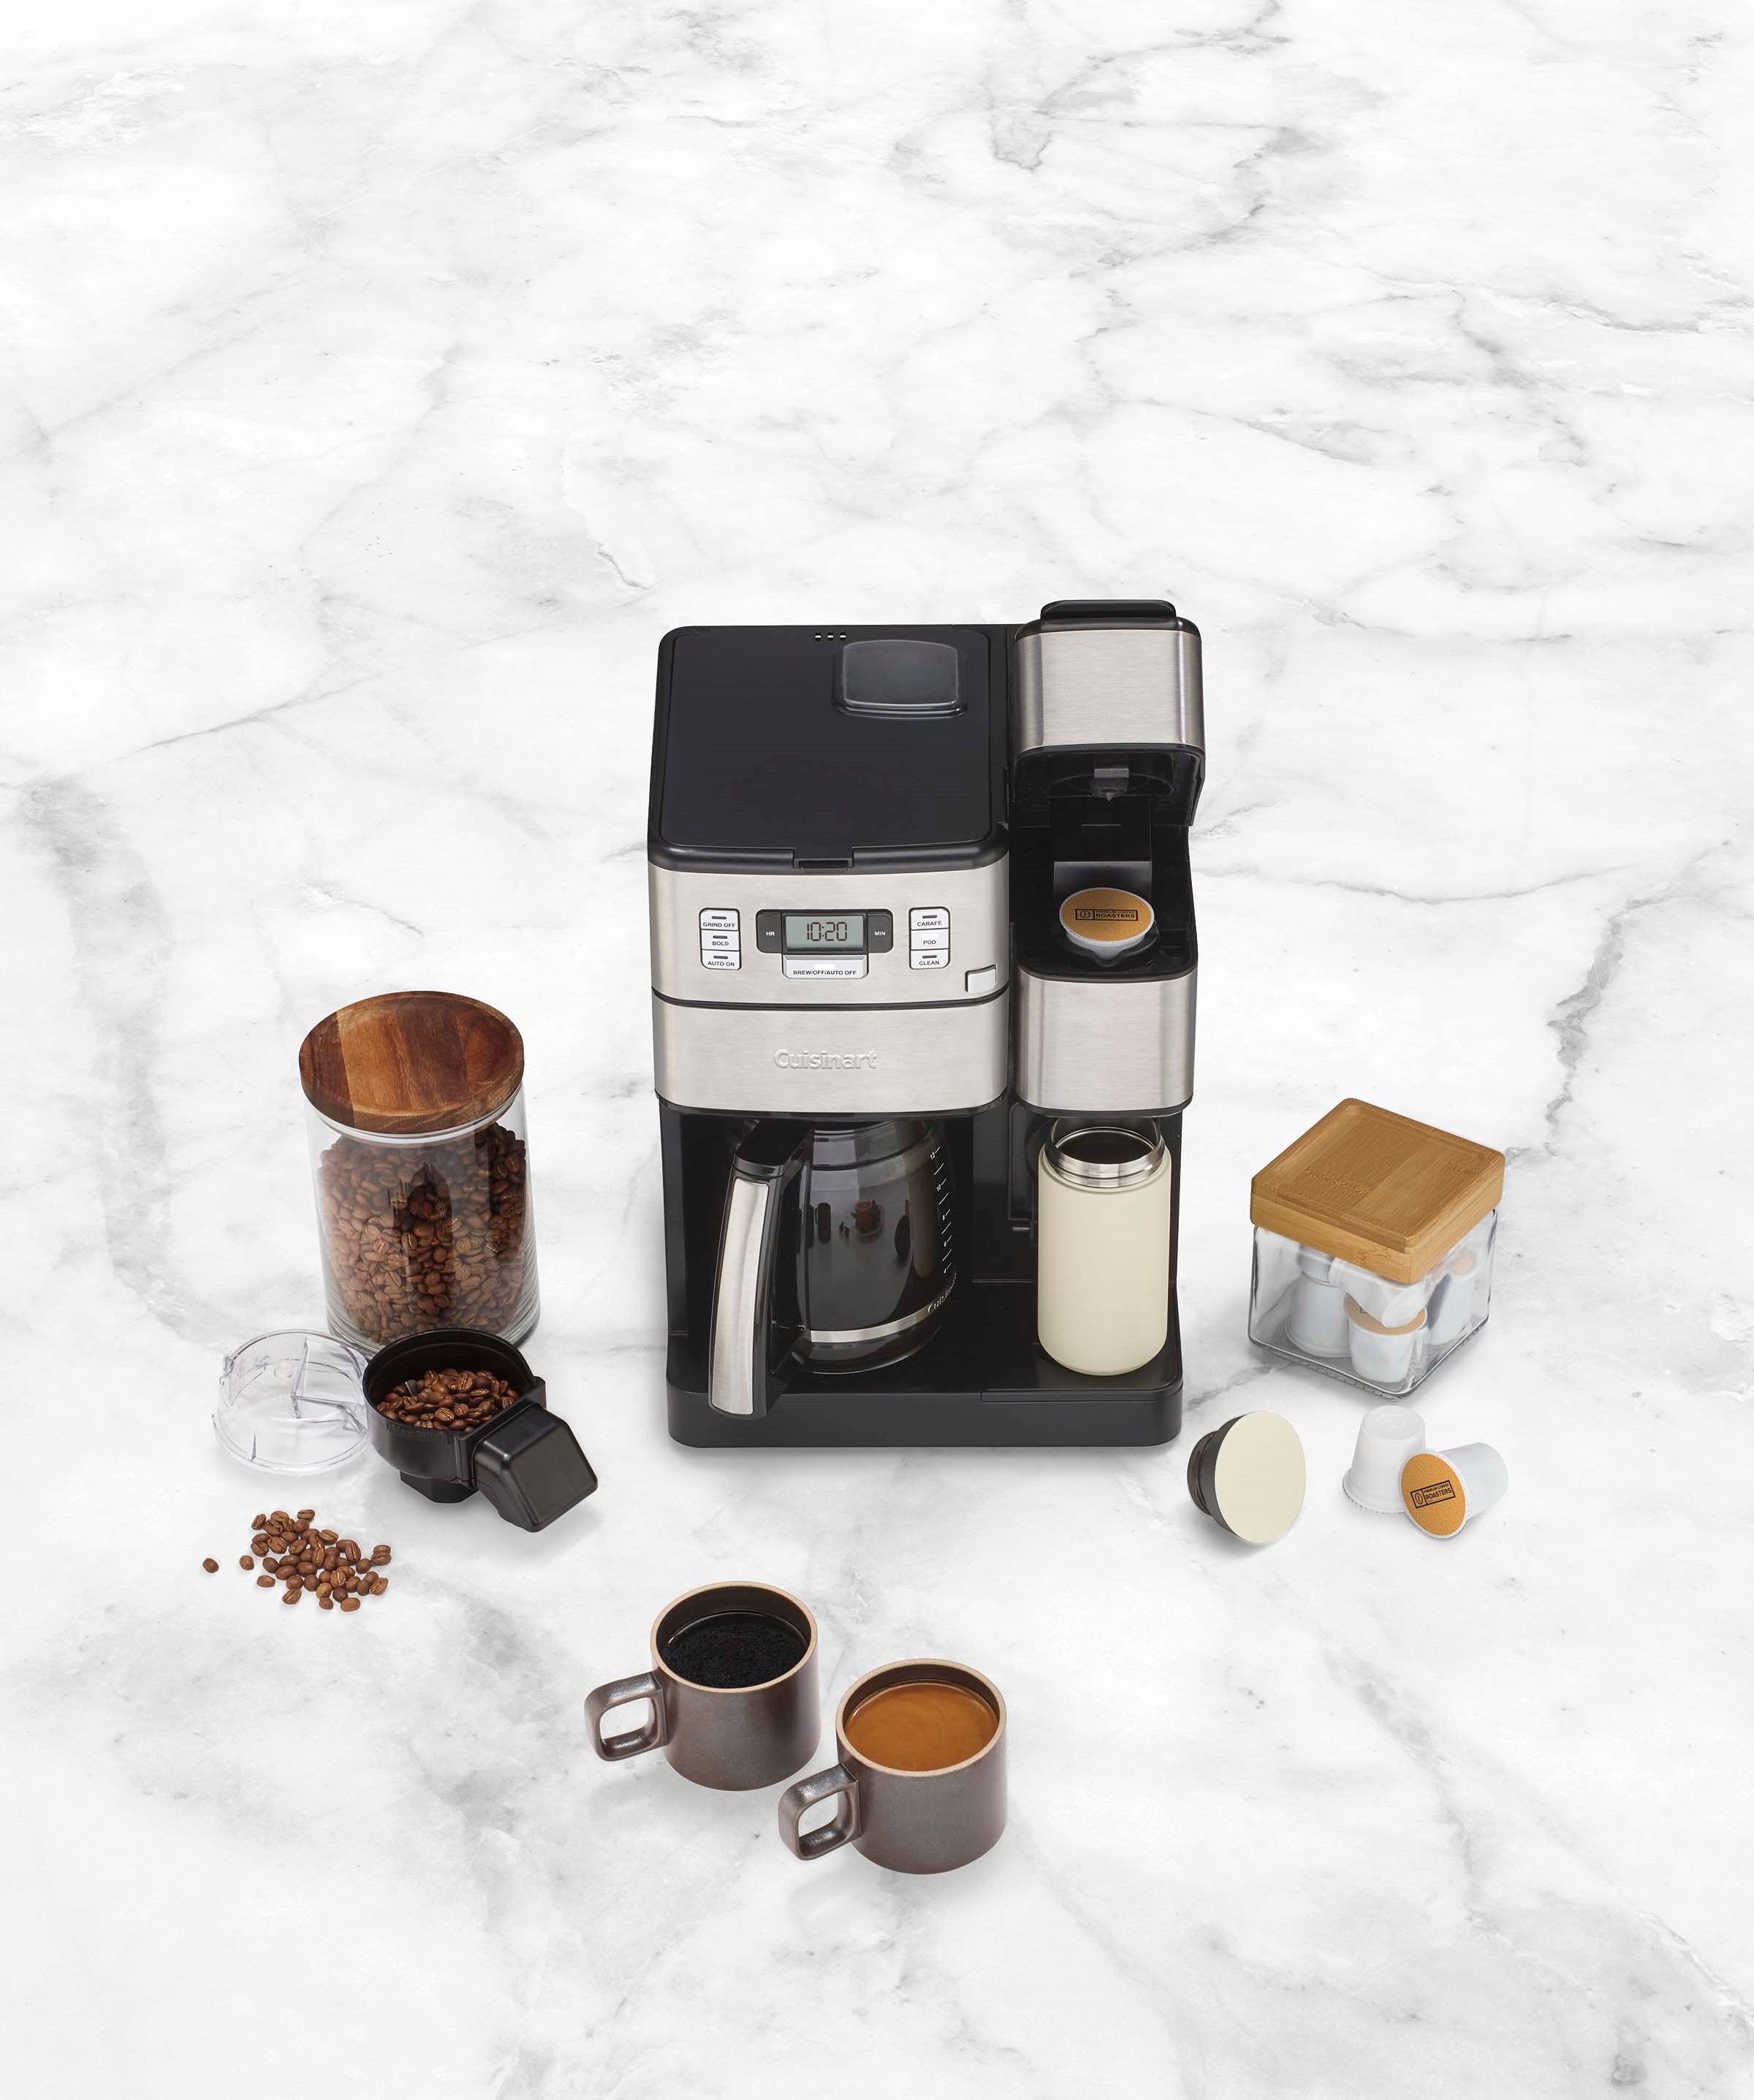 Cuisinart Coffee Centre Review: Jack or Master?